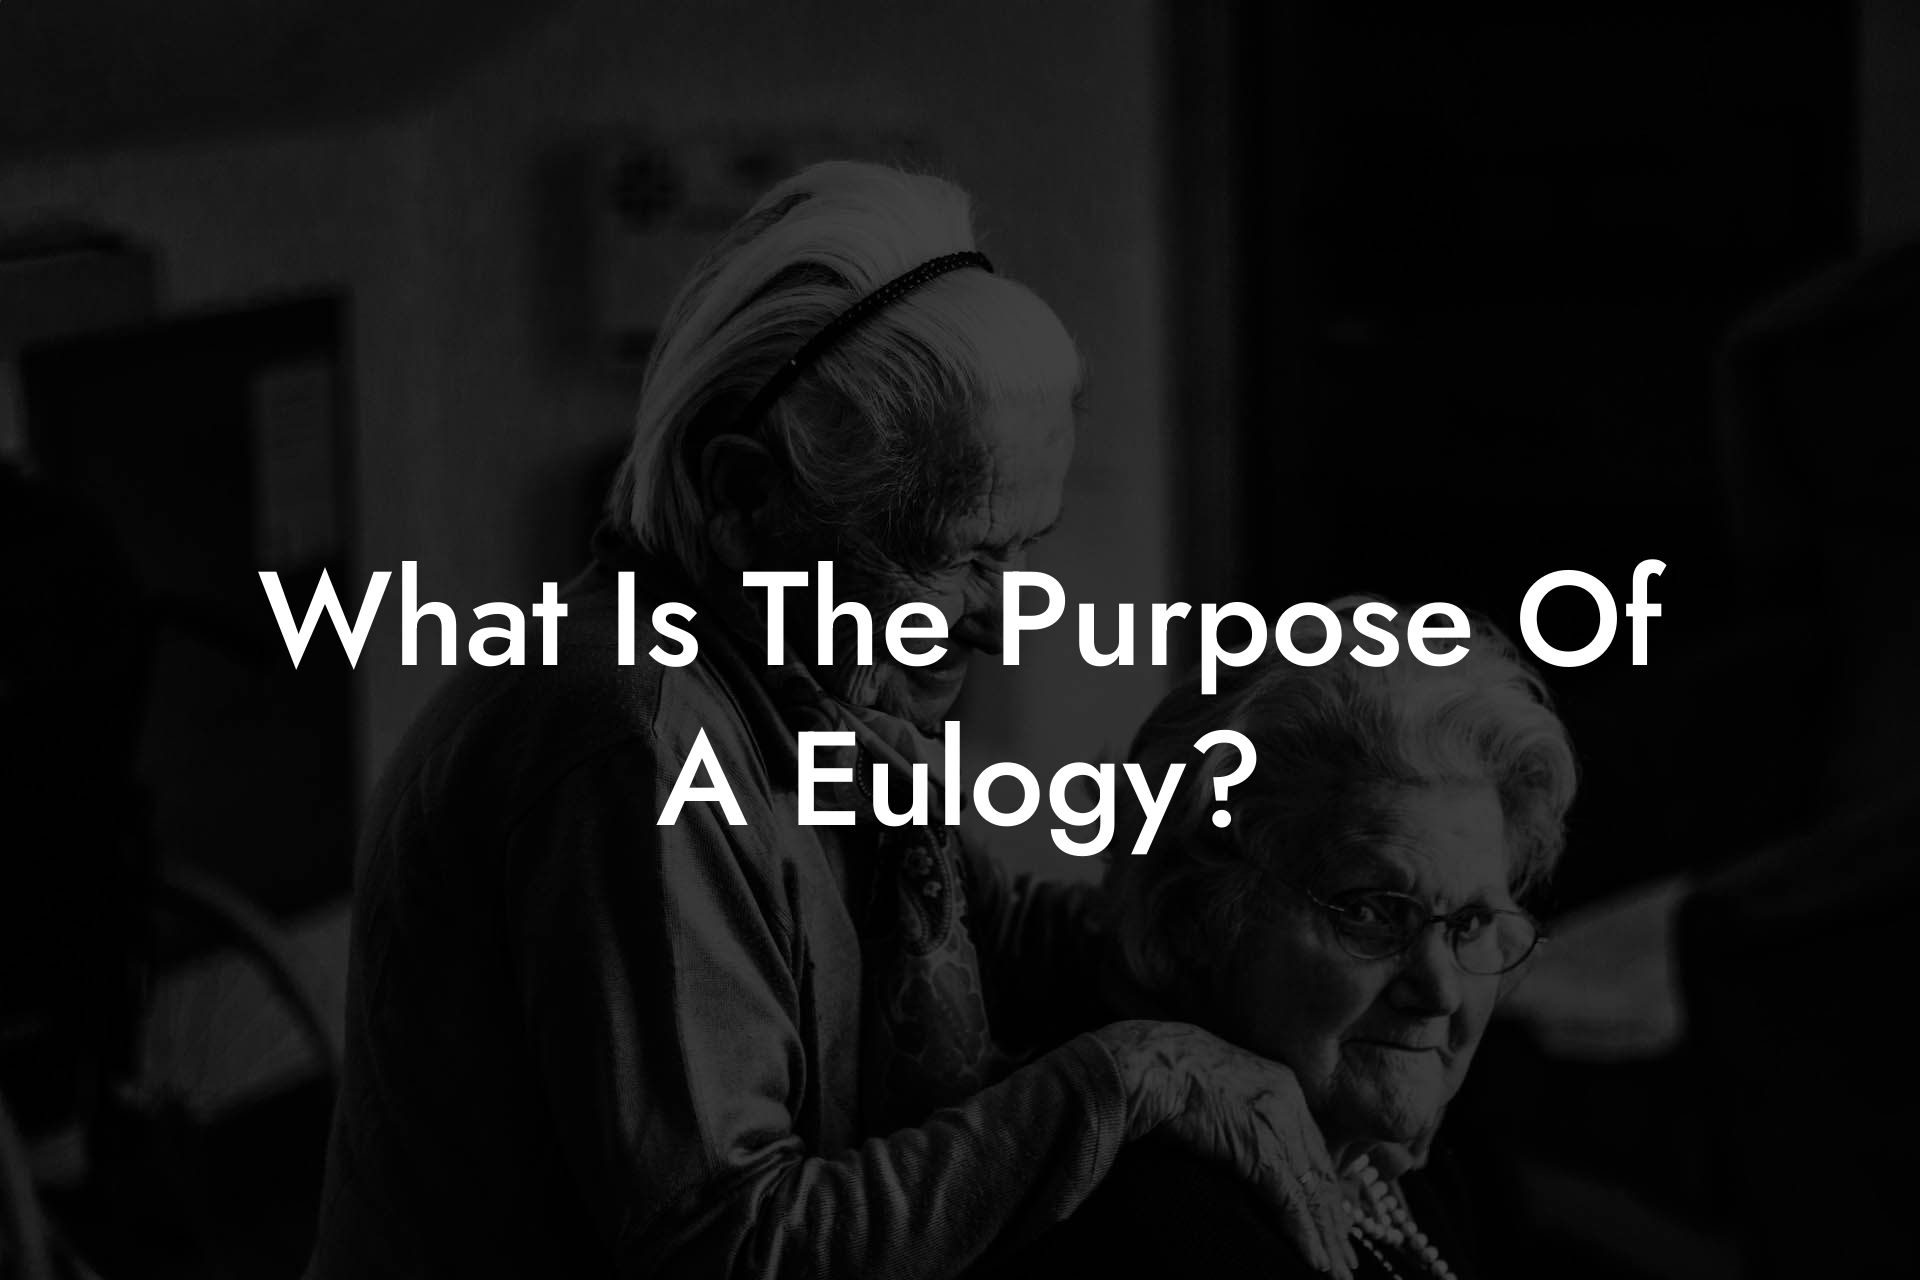 What Is The Purpose Of A Eulogy?